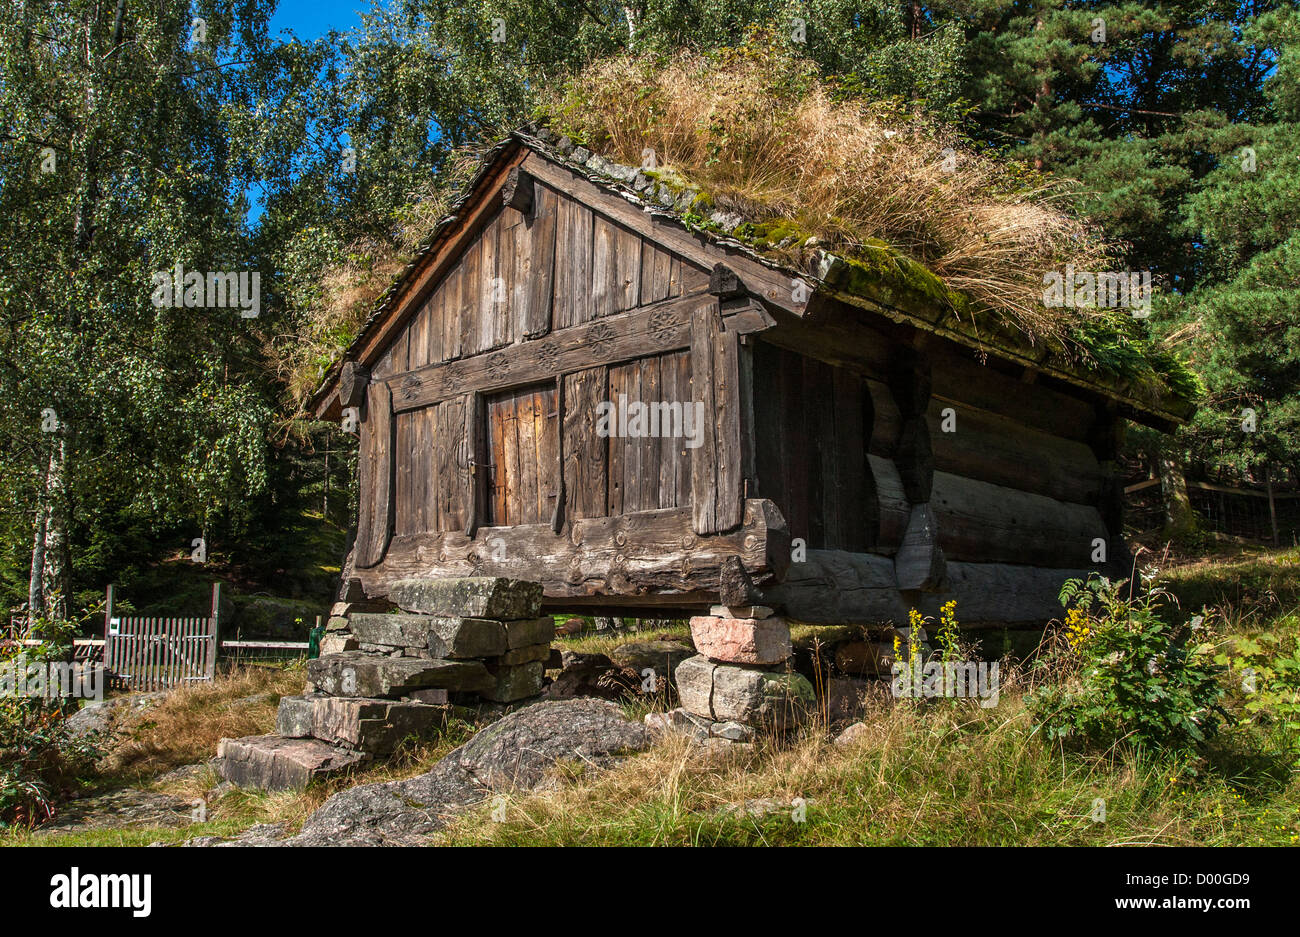 Farmhouse from the Setesdal region of Norway relocated at Vest -Agder Museum near Kristiansand Stock Photo